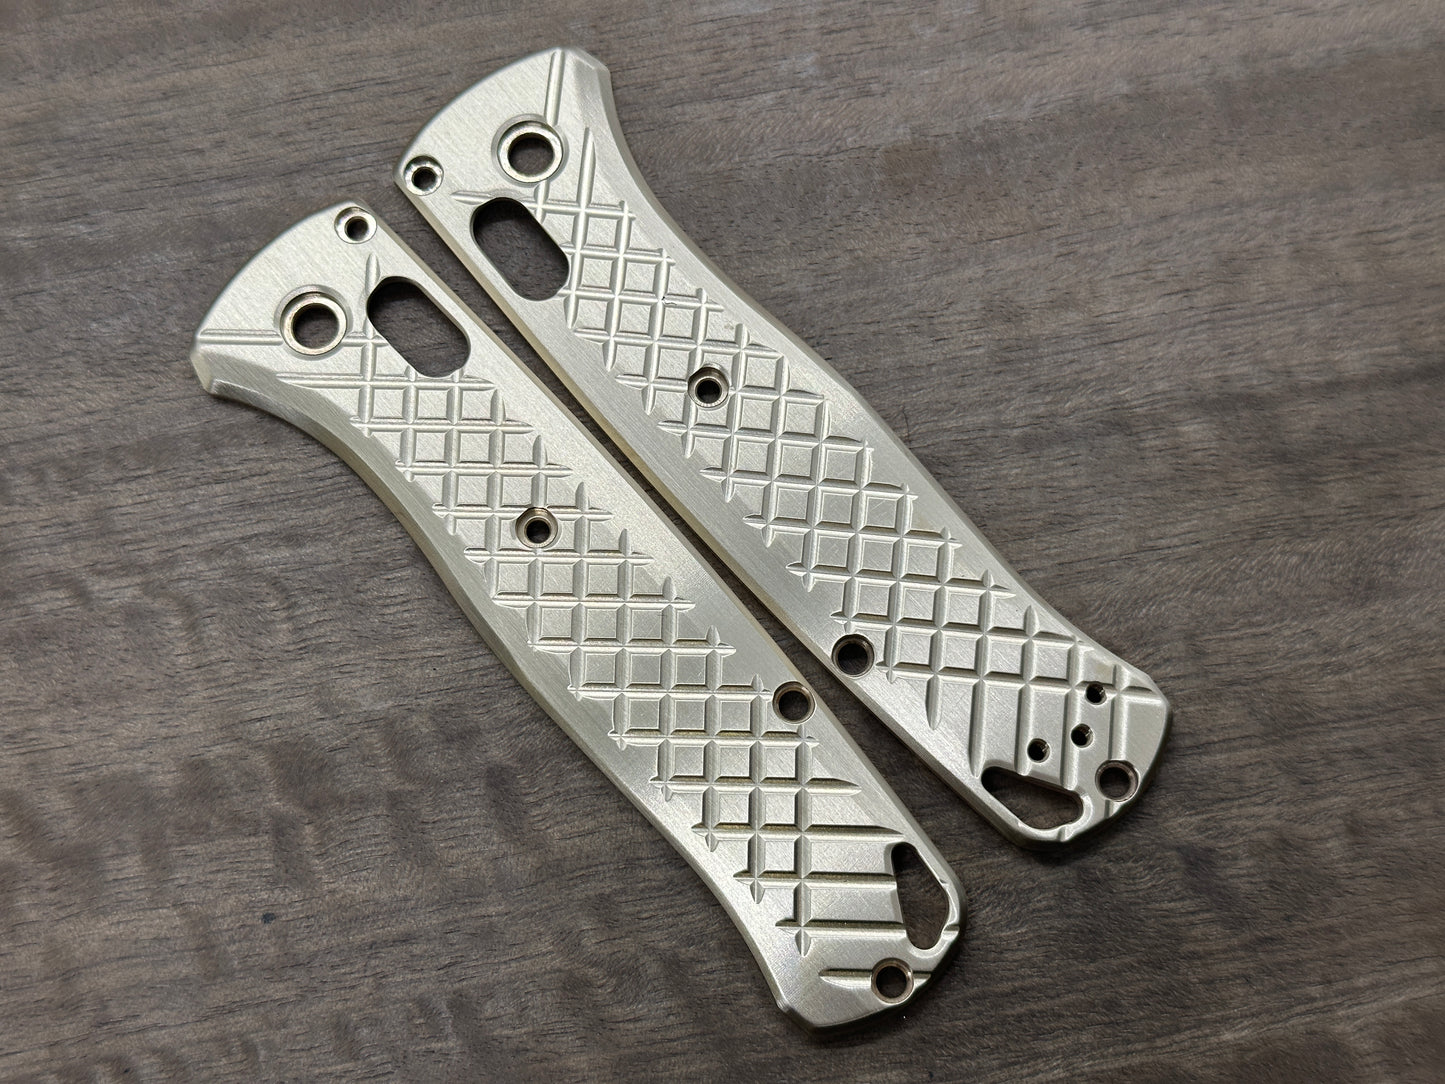 Brass FRAG Cnc milled Scales for Benchmade Bugout 535